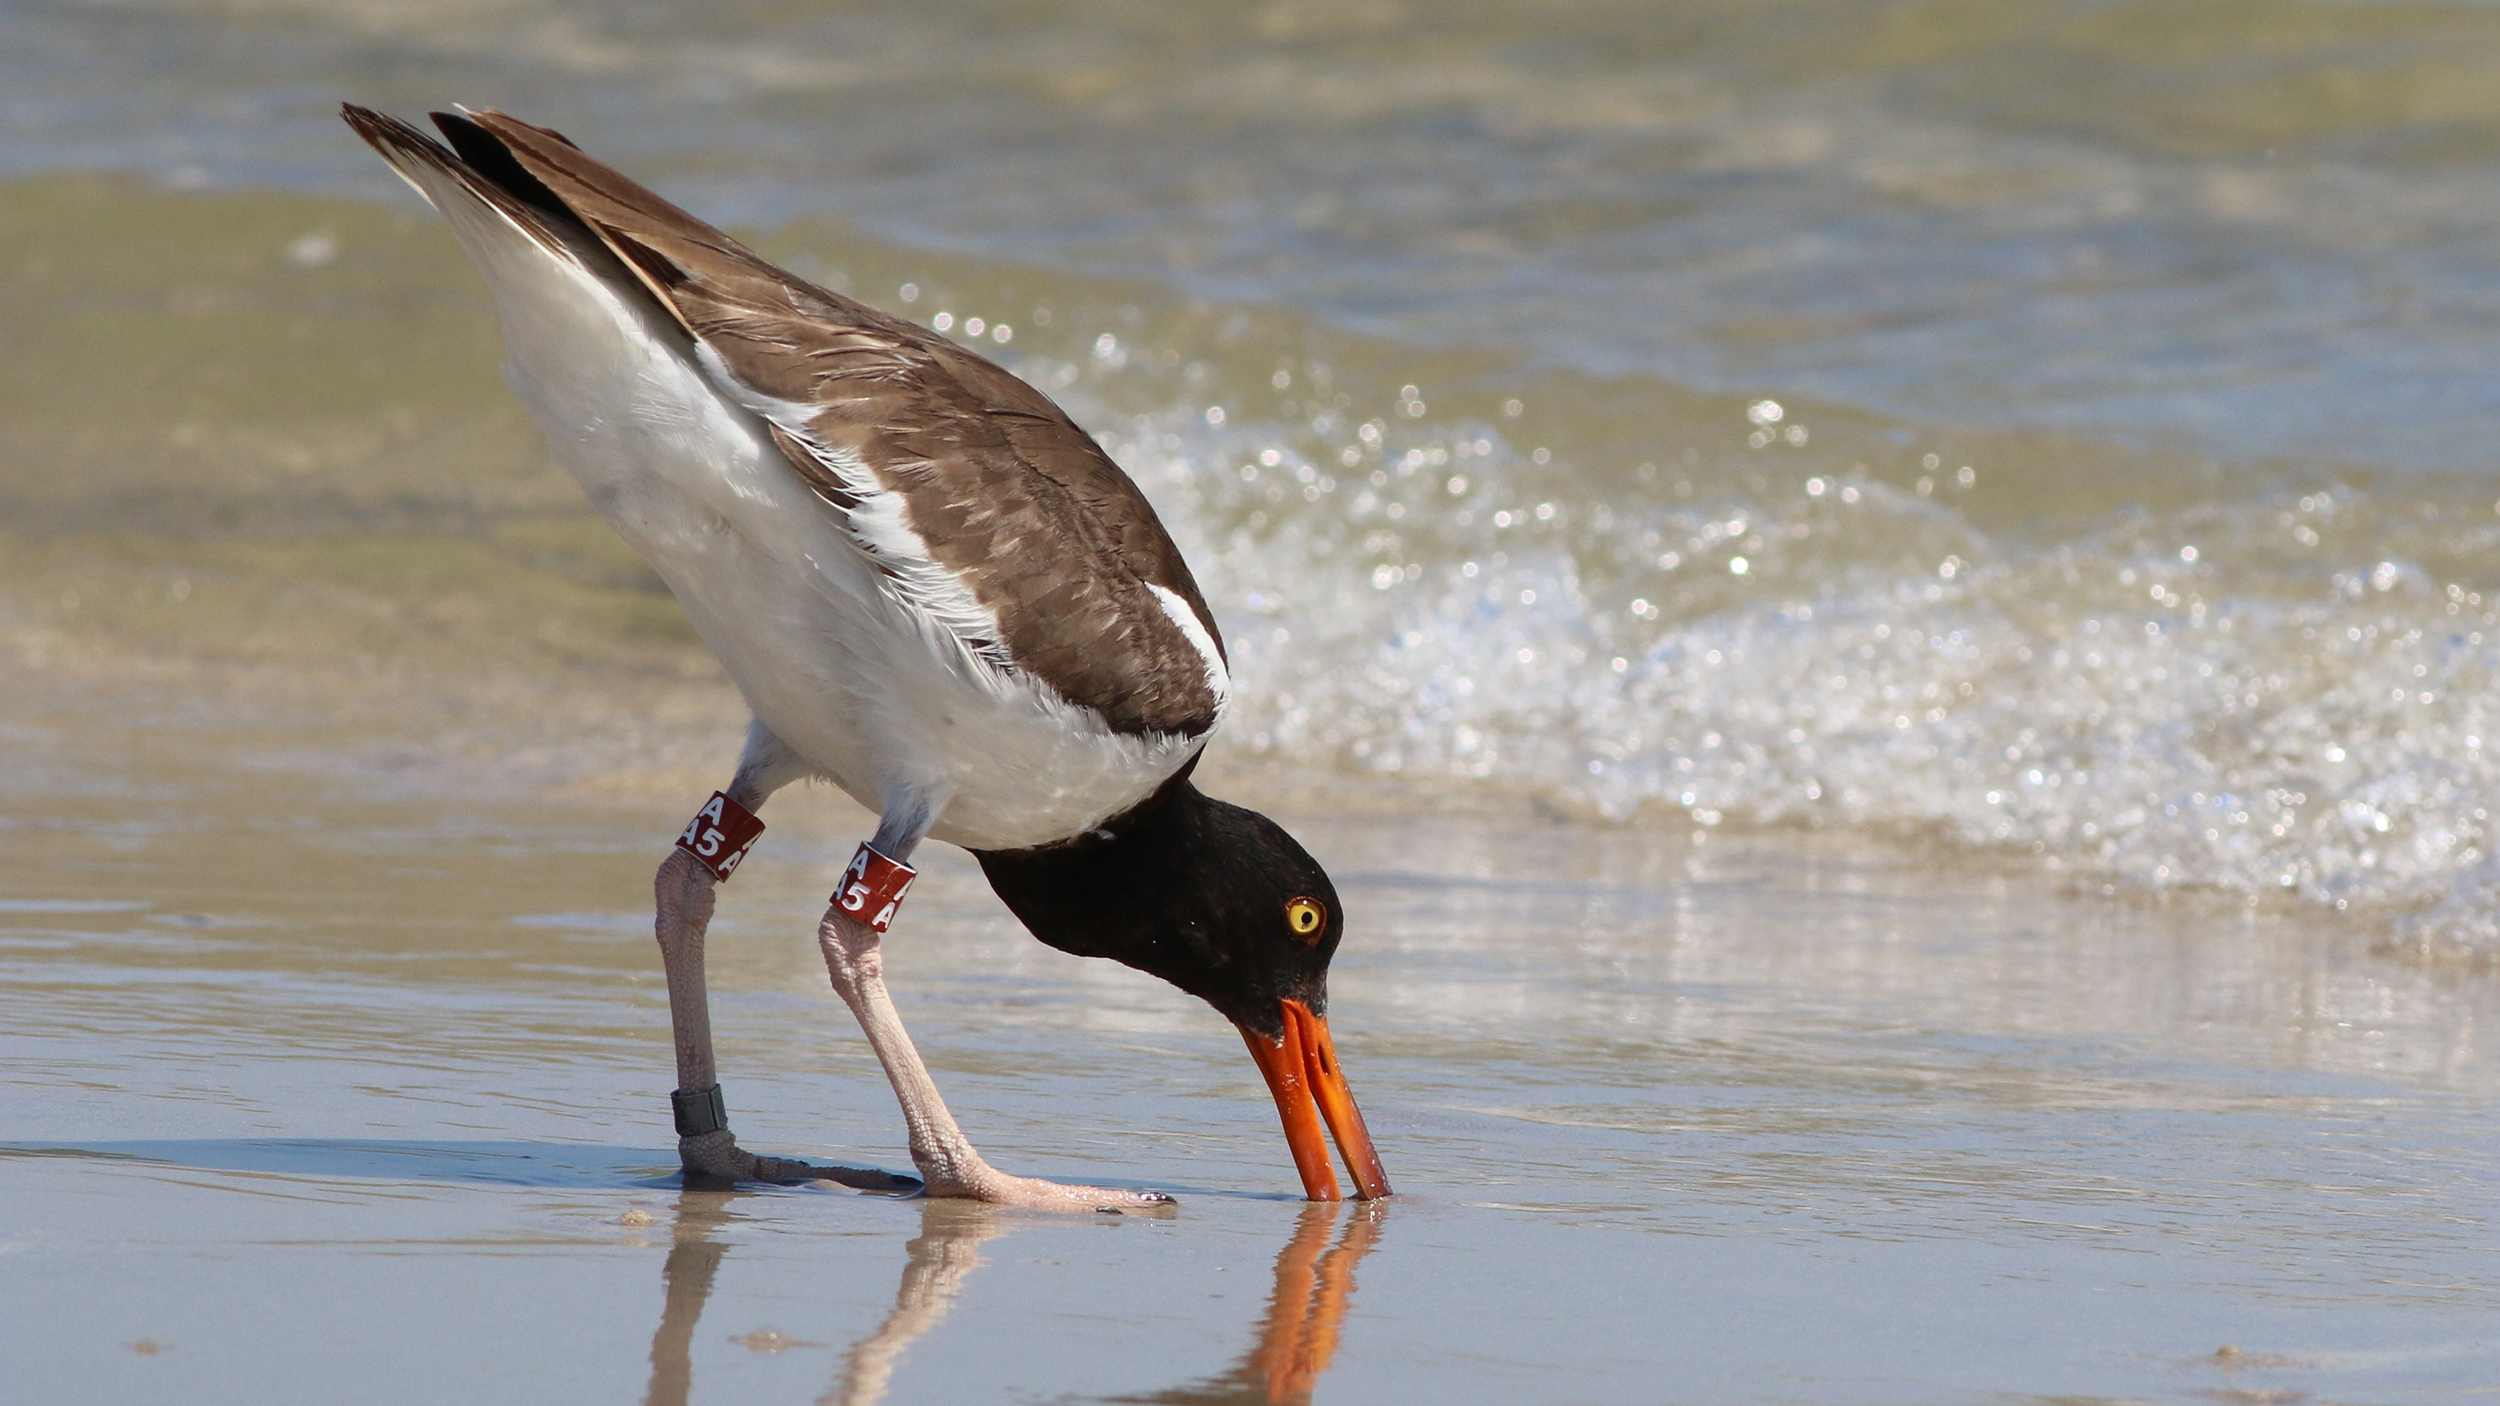 An American Oystercatcher foraging on the beach.